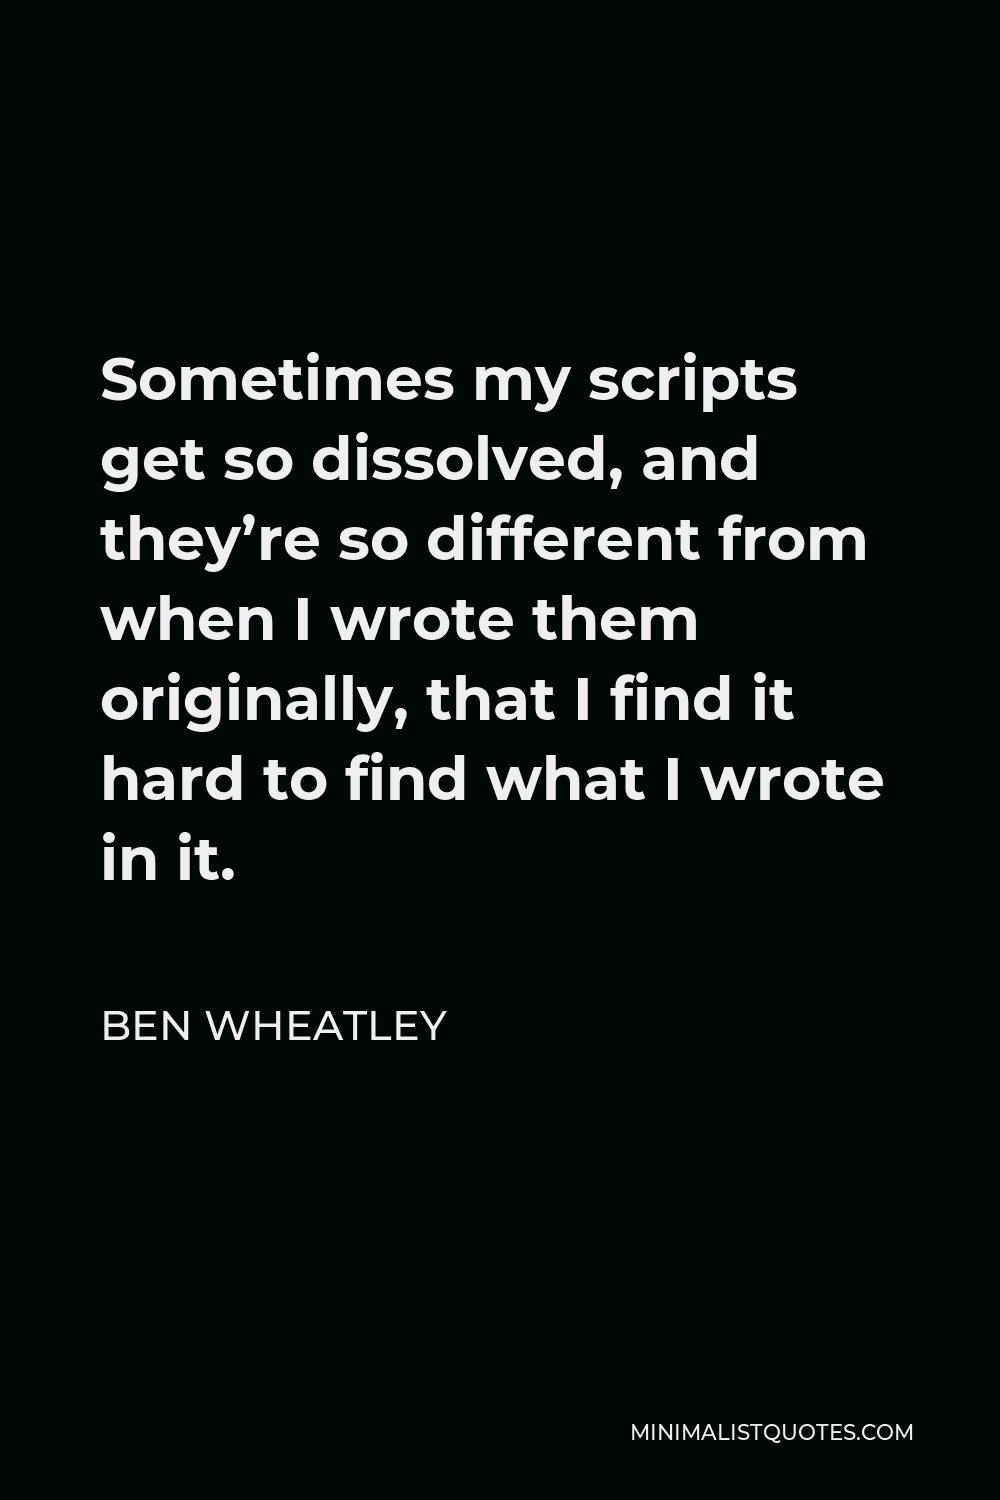 Ben Wheatley Quote - Sometimes my scripts get so dissolved, and they’re so different from when I wrote them originally, that I find it hard to find what I wrote in it.